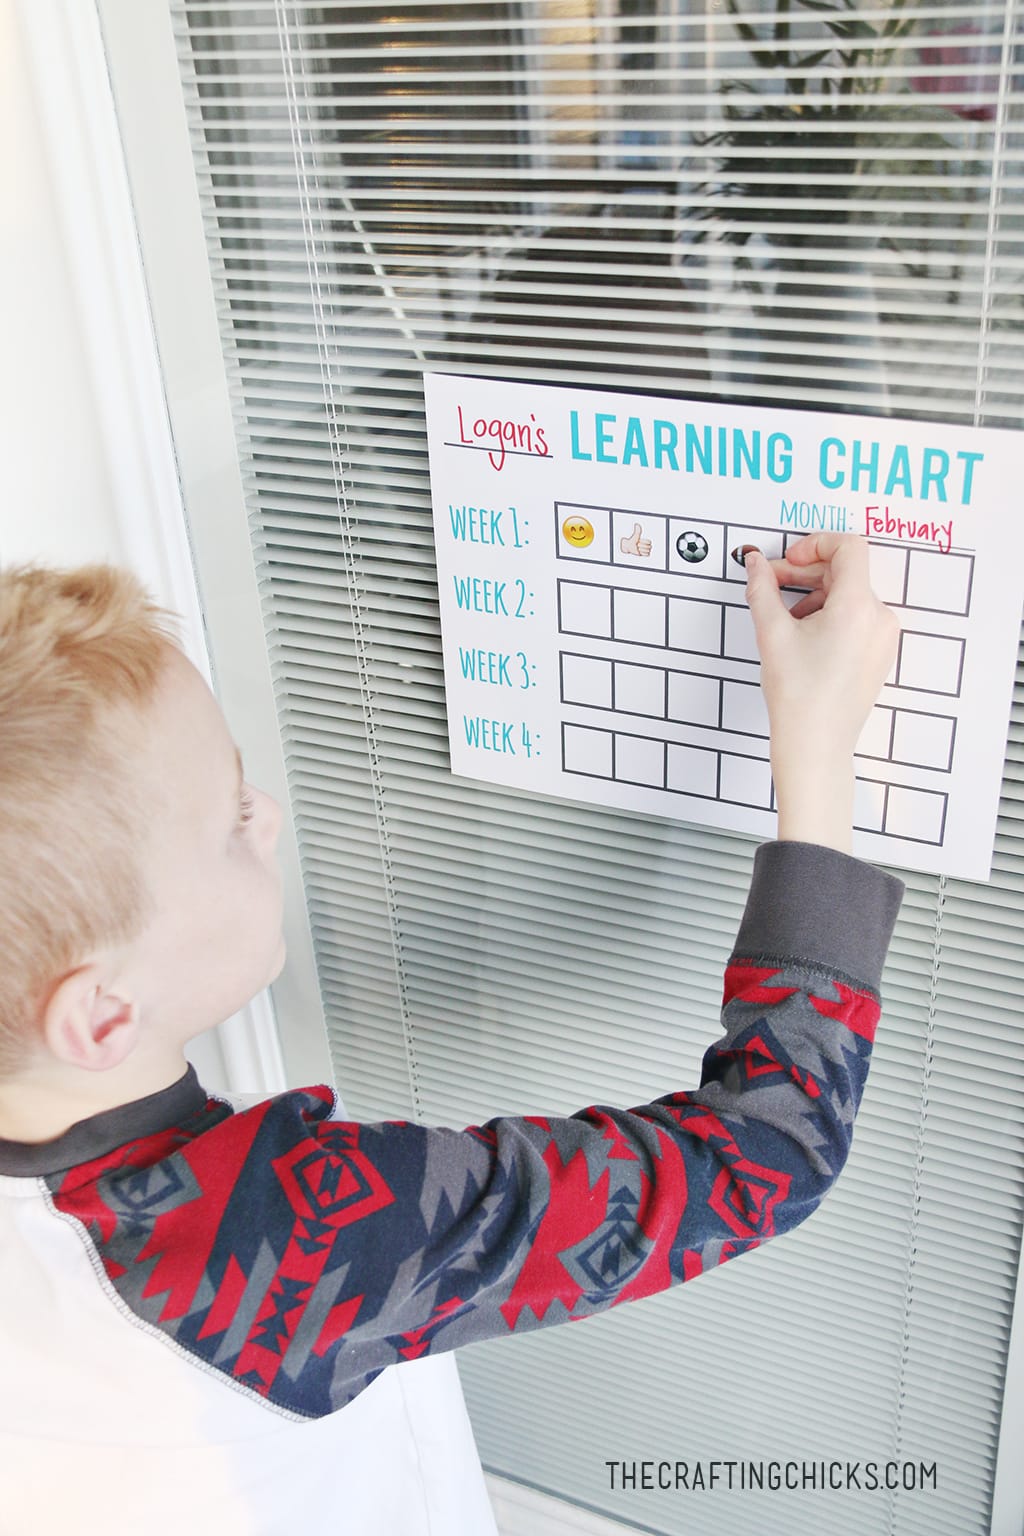 Learning Tracking Chart - A great way to track progress, and celebrate learning achievements at home!